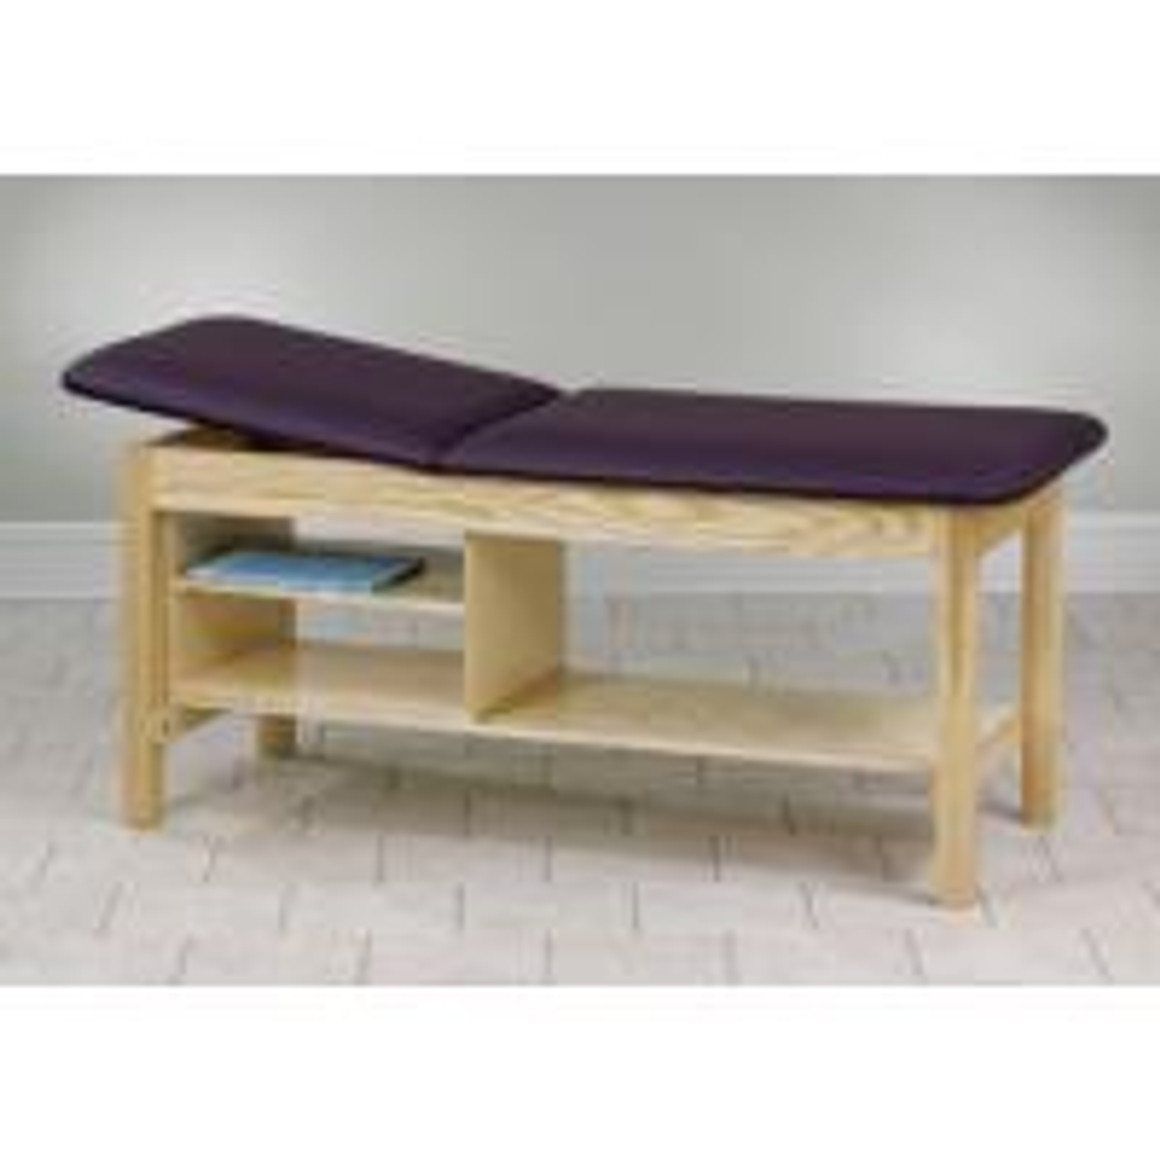 Clinton Classic Series Straight Line Treatment Table with Shelving Unit, 27" Wide, Mulberry